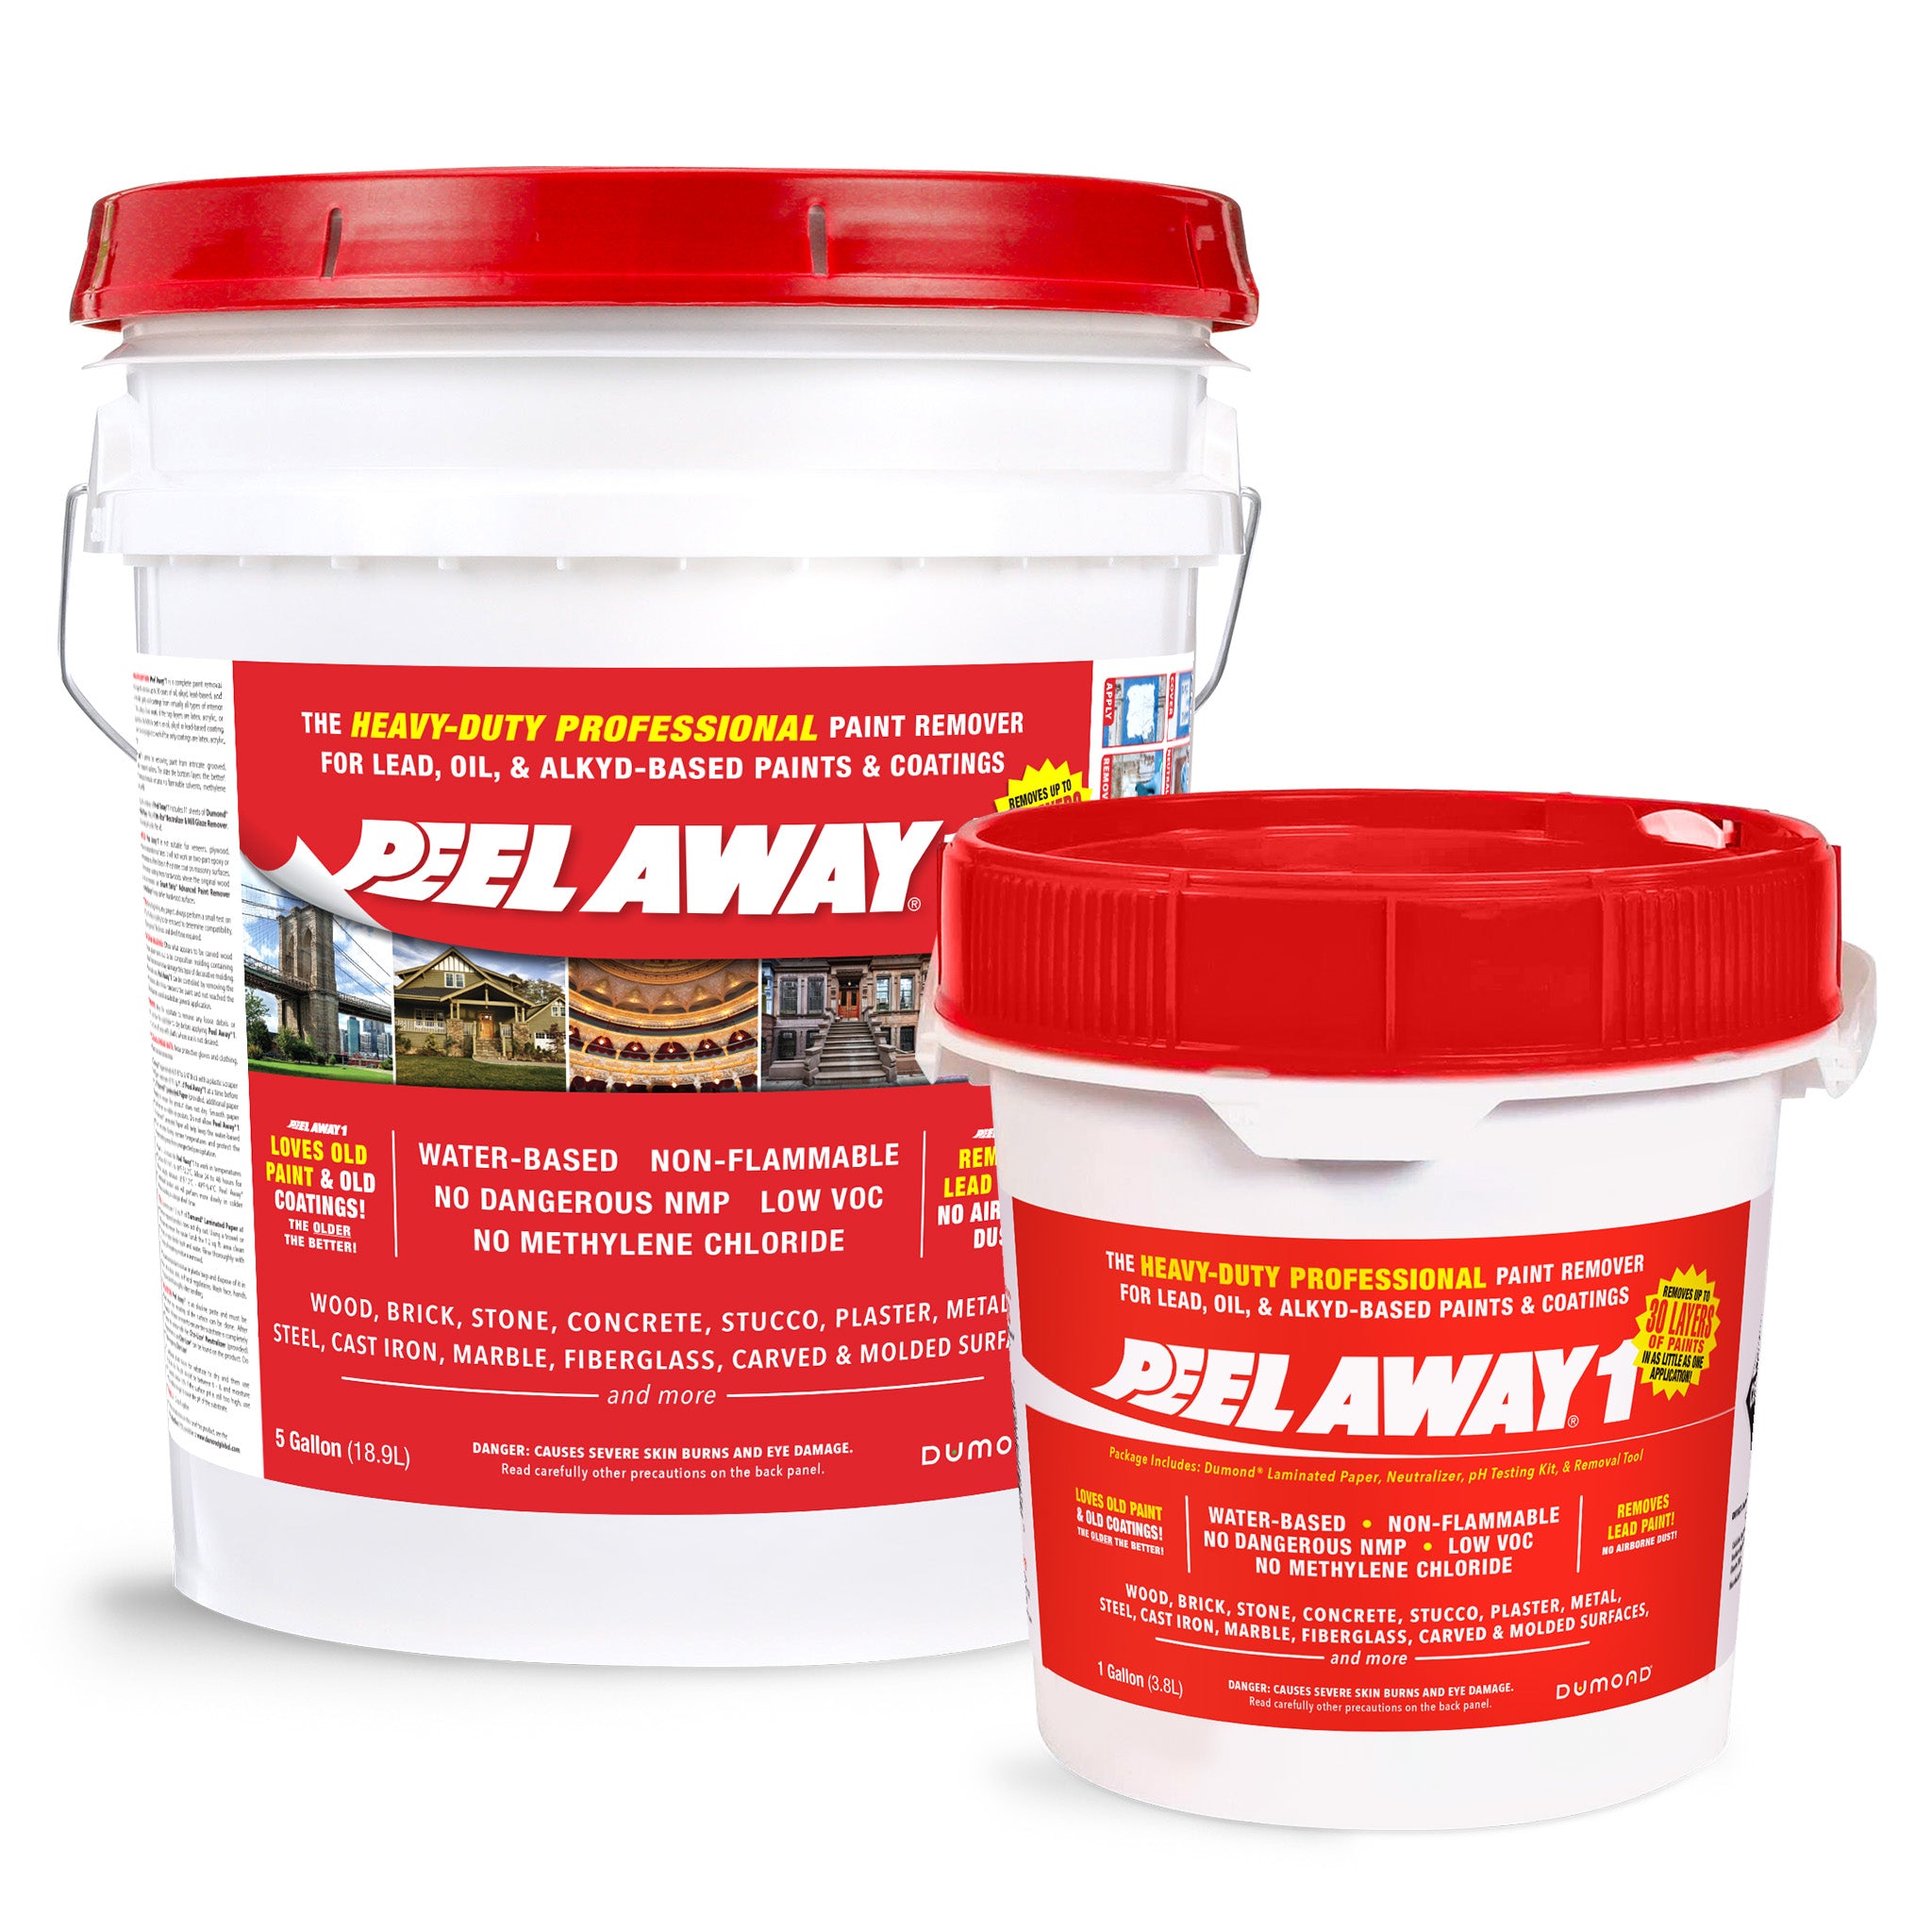 Peel Away® 1 Heavy Duty Paint Remover Complete Removal System - Janovic